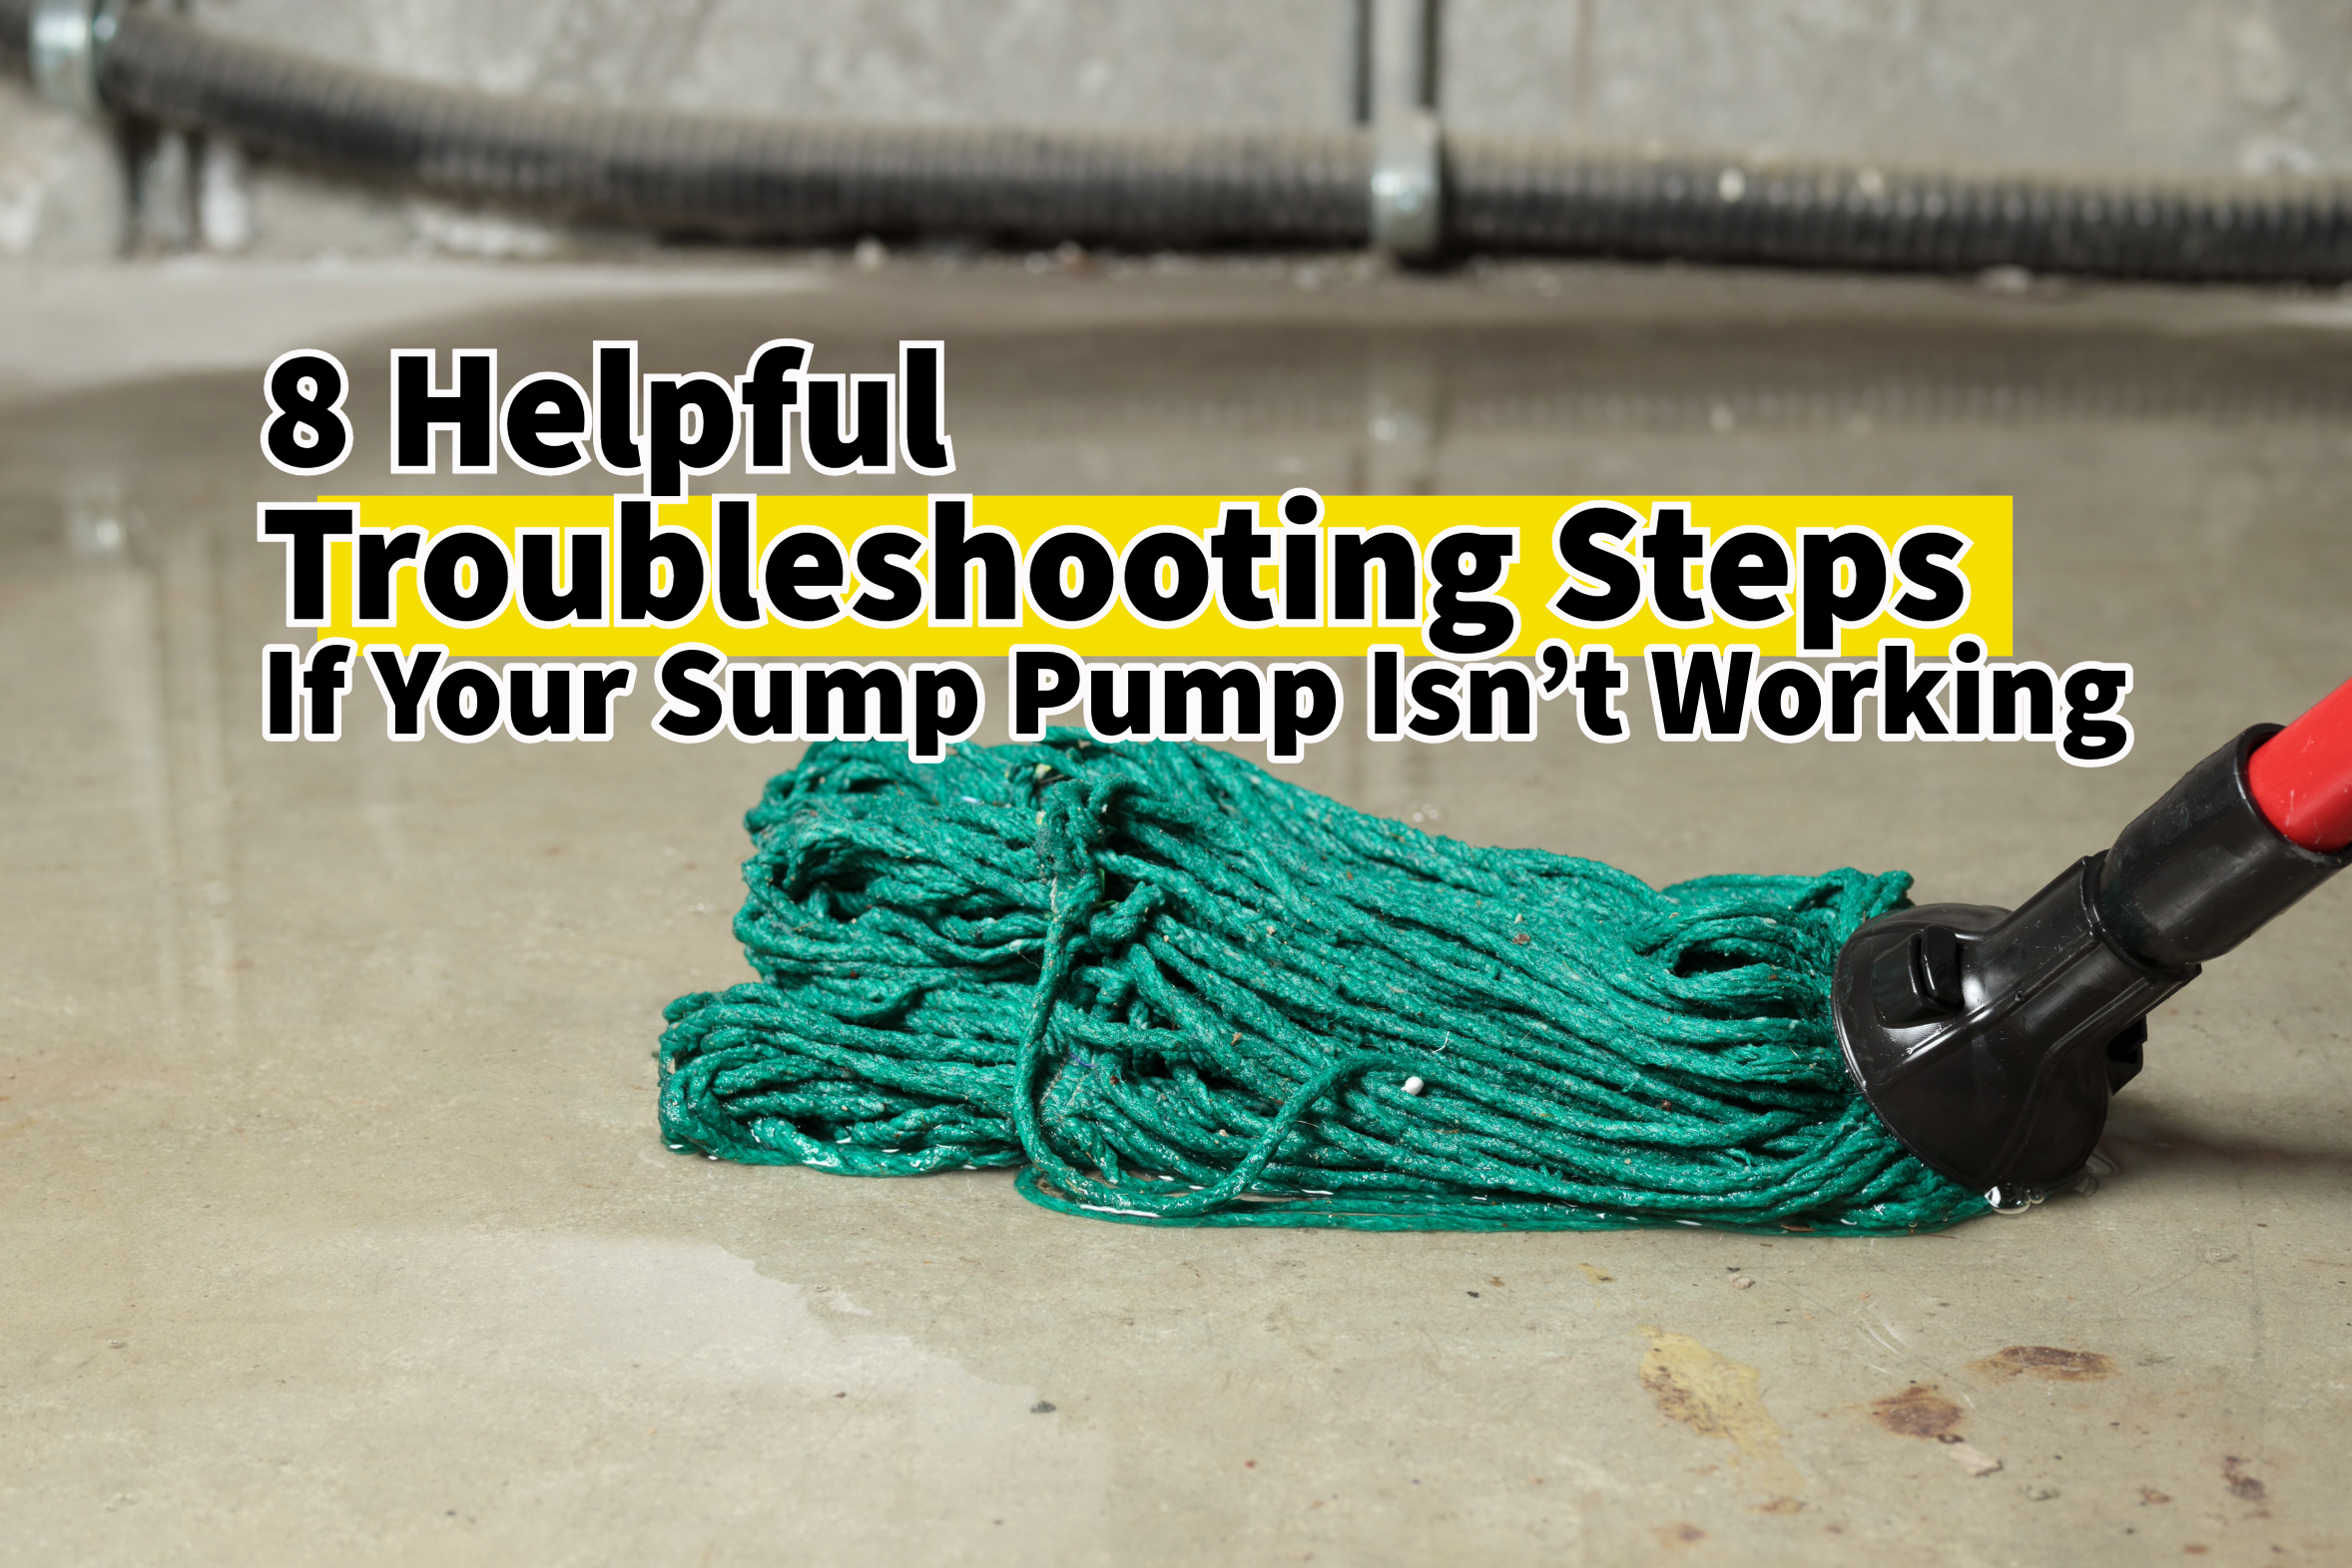 A homeowner’s guide to troubleshooting a malfunctioning sump pump. Plumbing and drain services in Middletown, Ohio.